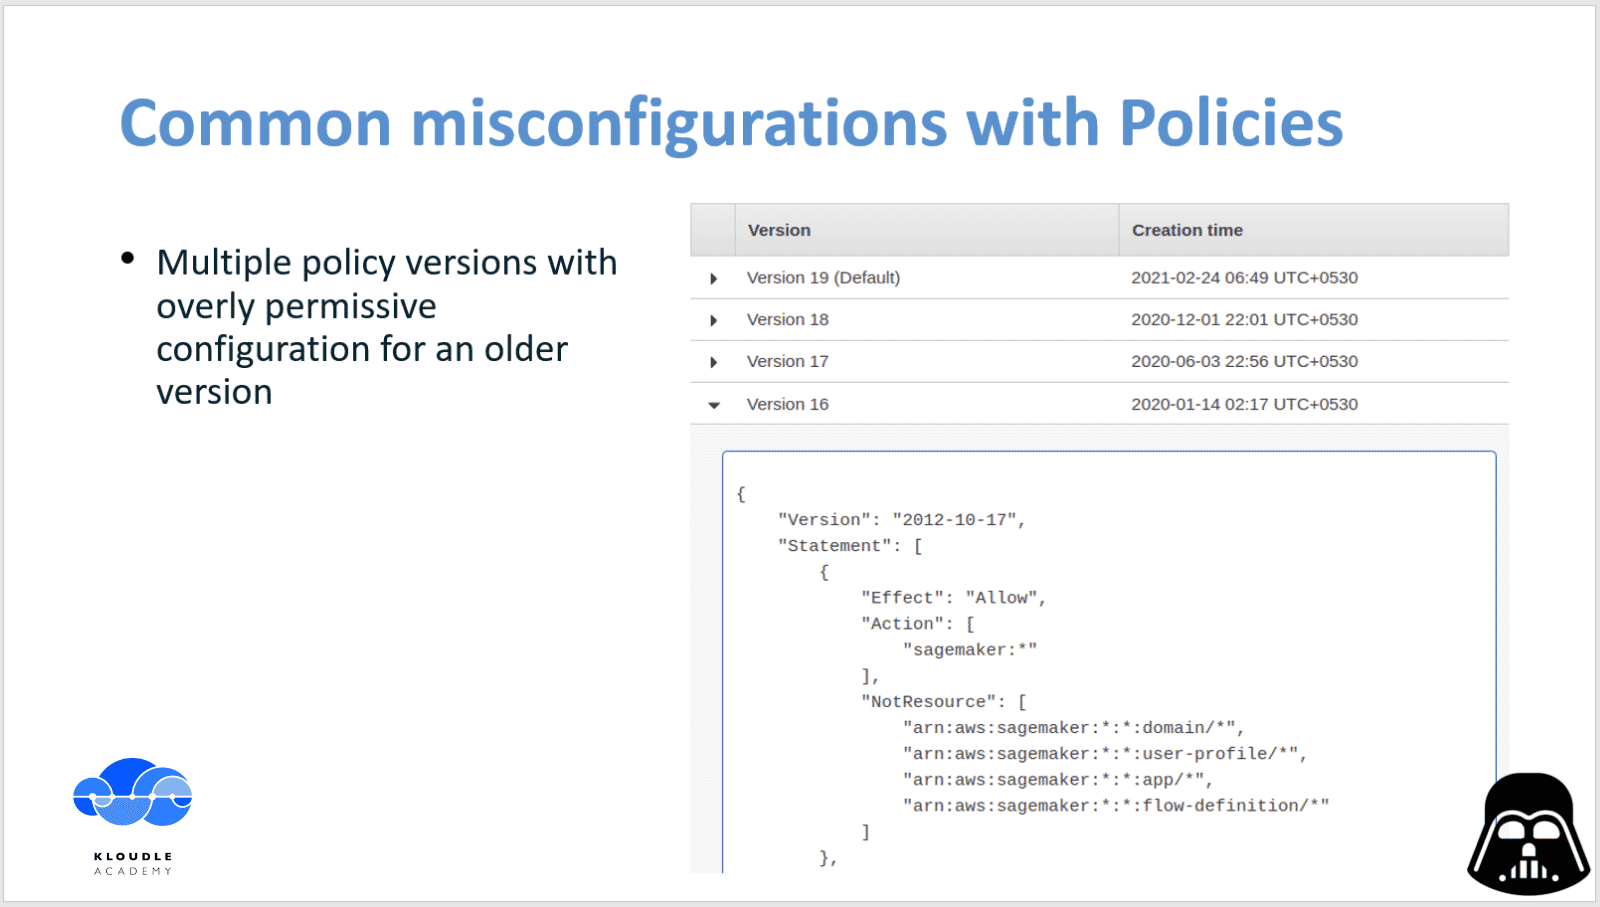 common mis-configuration with policies